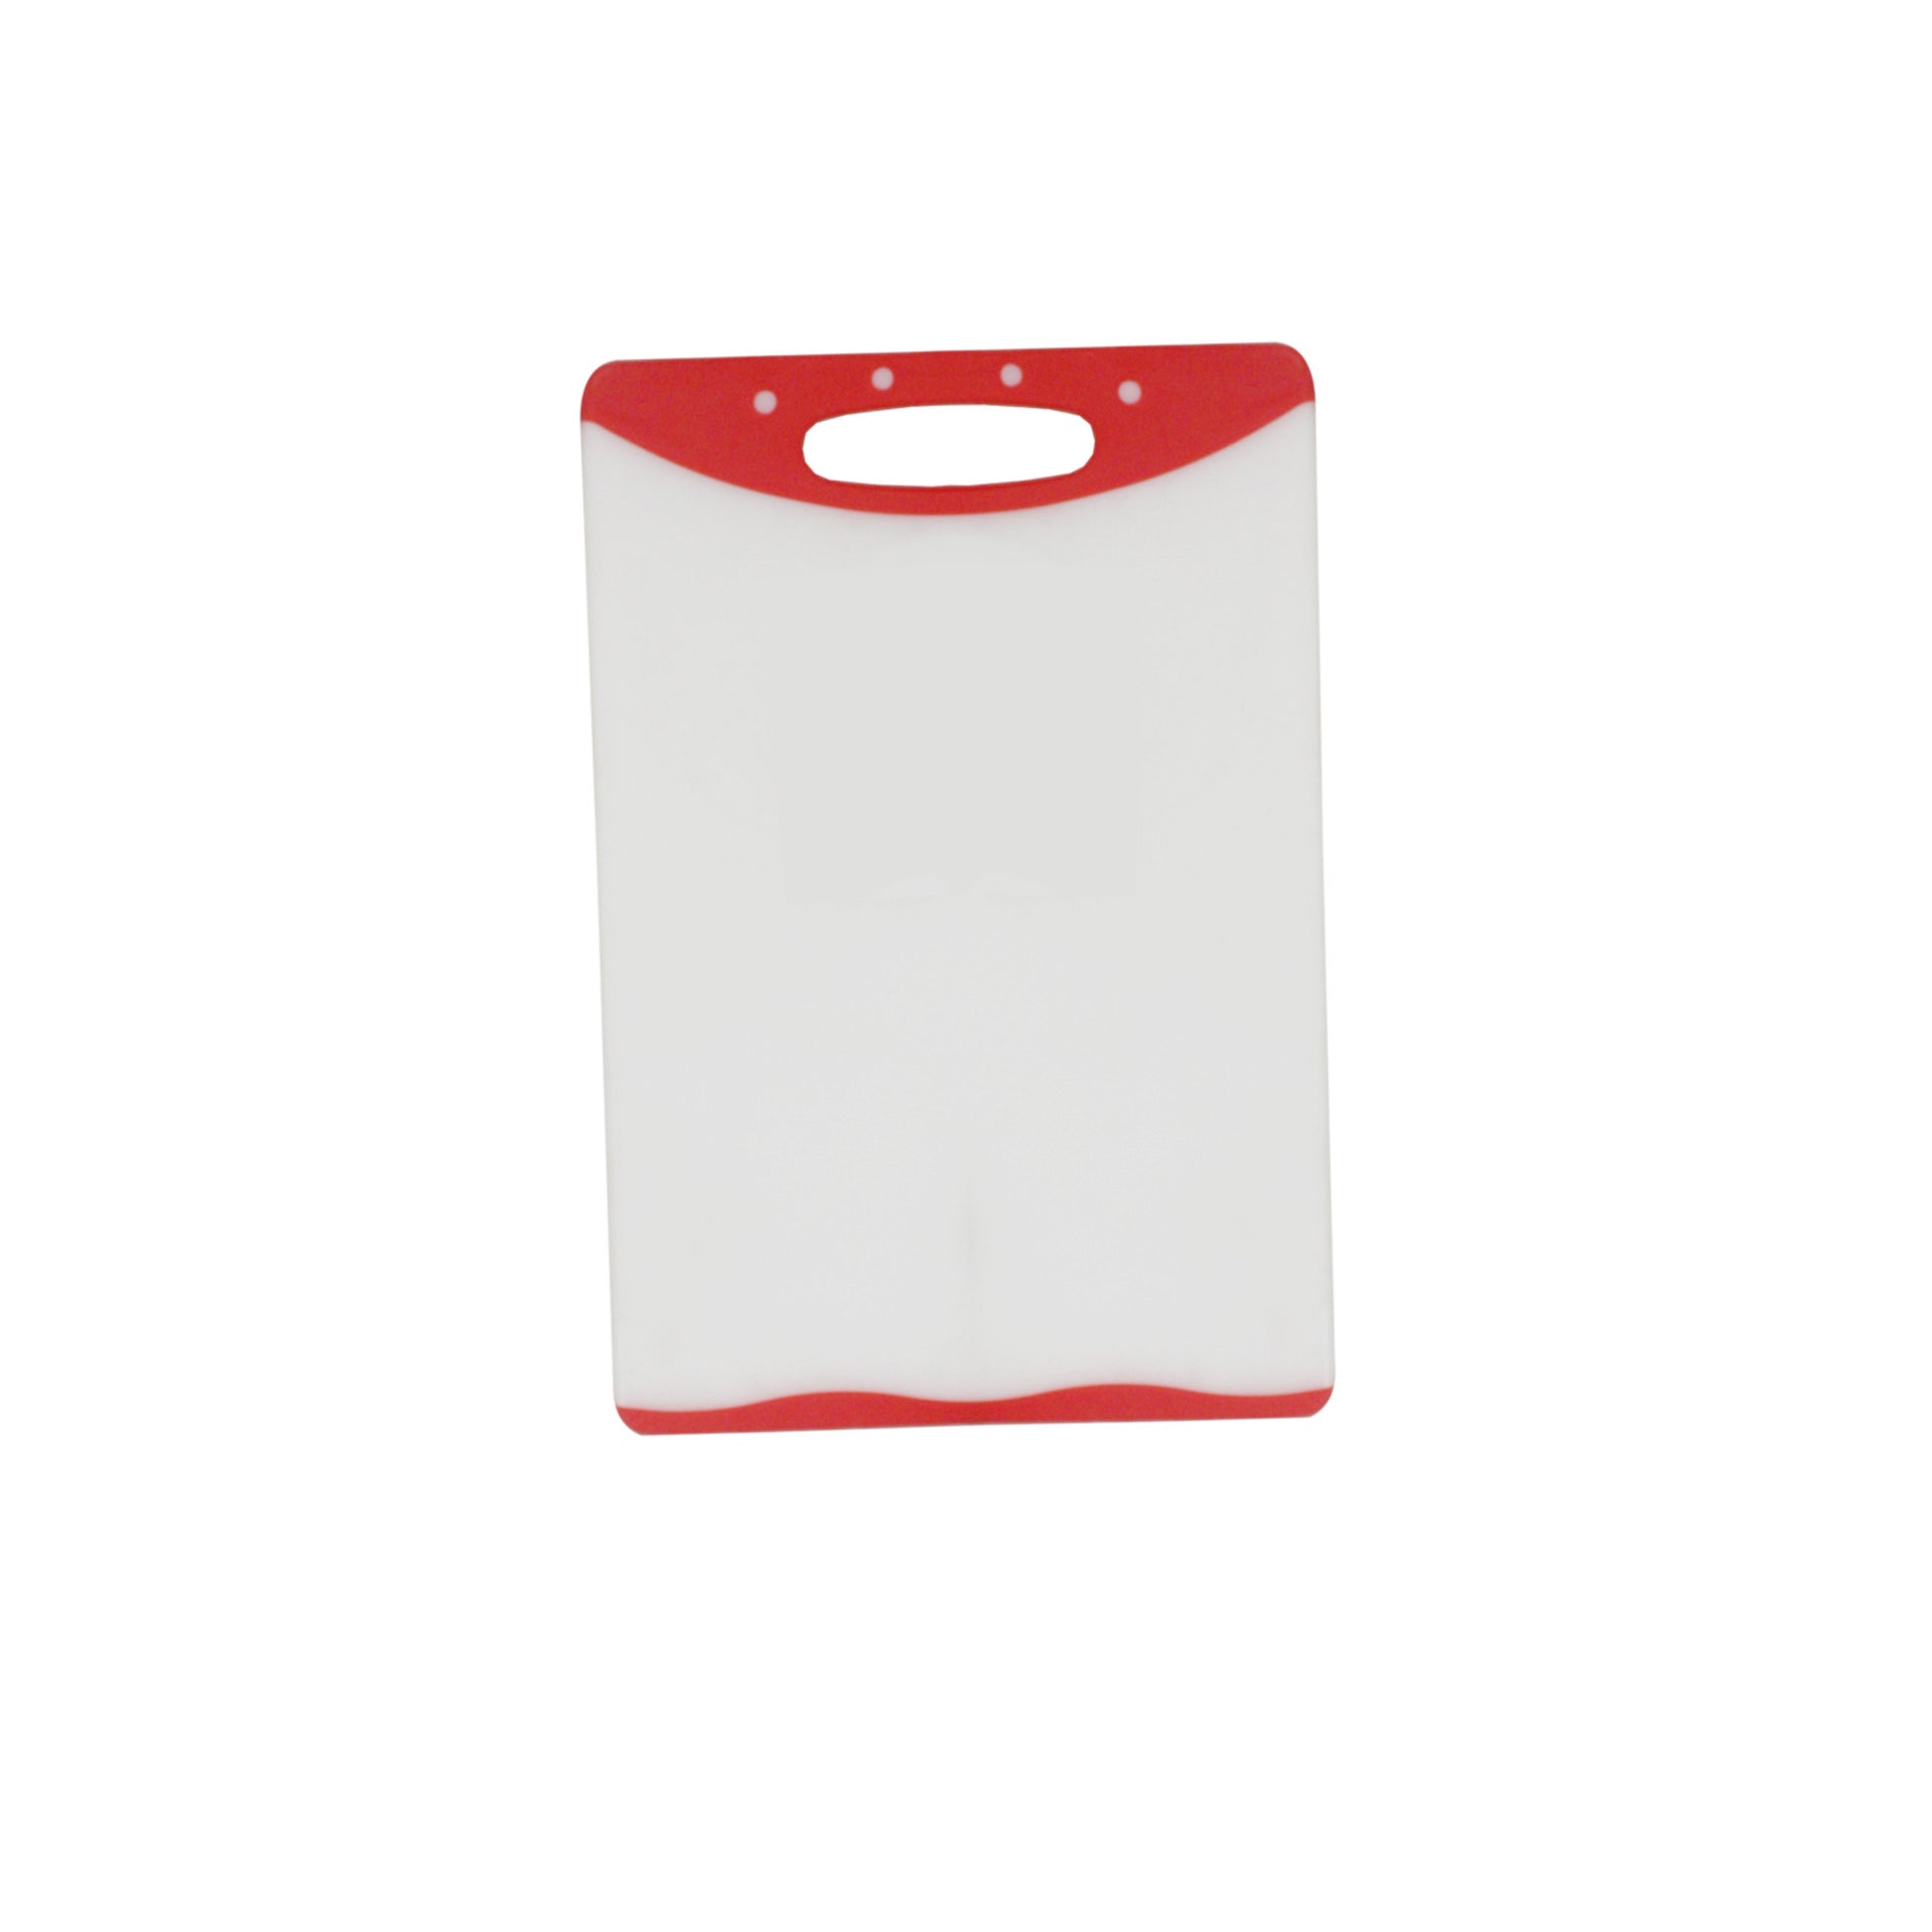 Home Basics 12” x 18" Dual Sided Plastic Cutting Board with Rubberized Non-Slip Edges, Red - Red